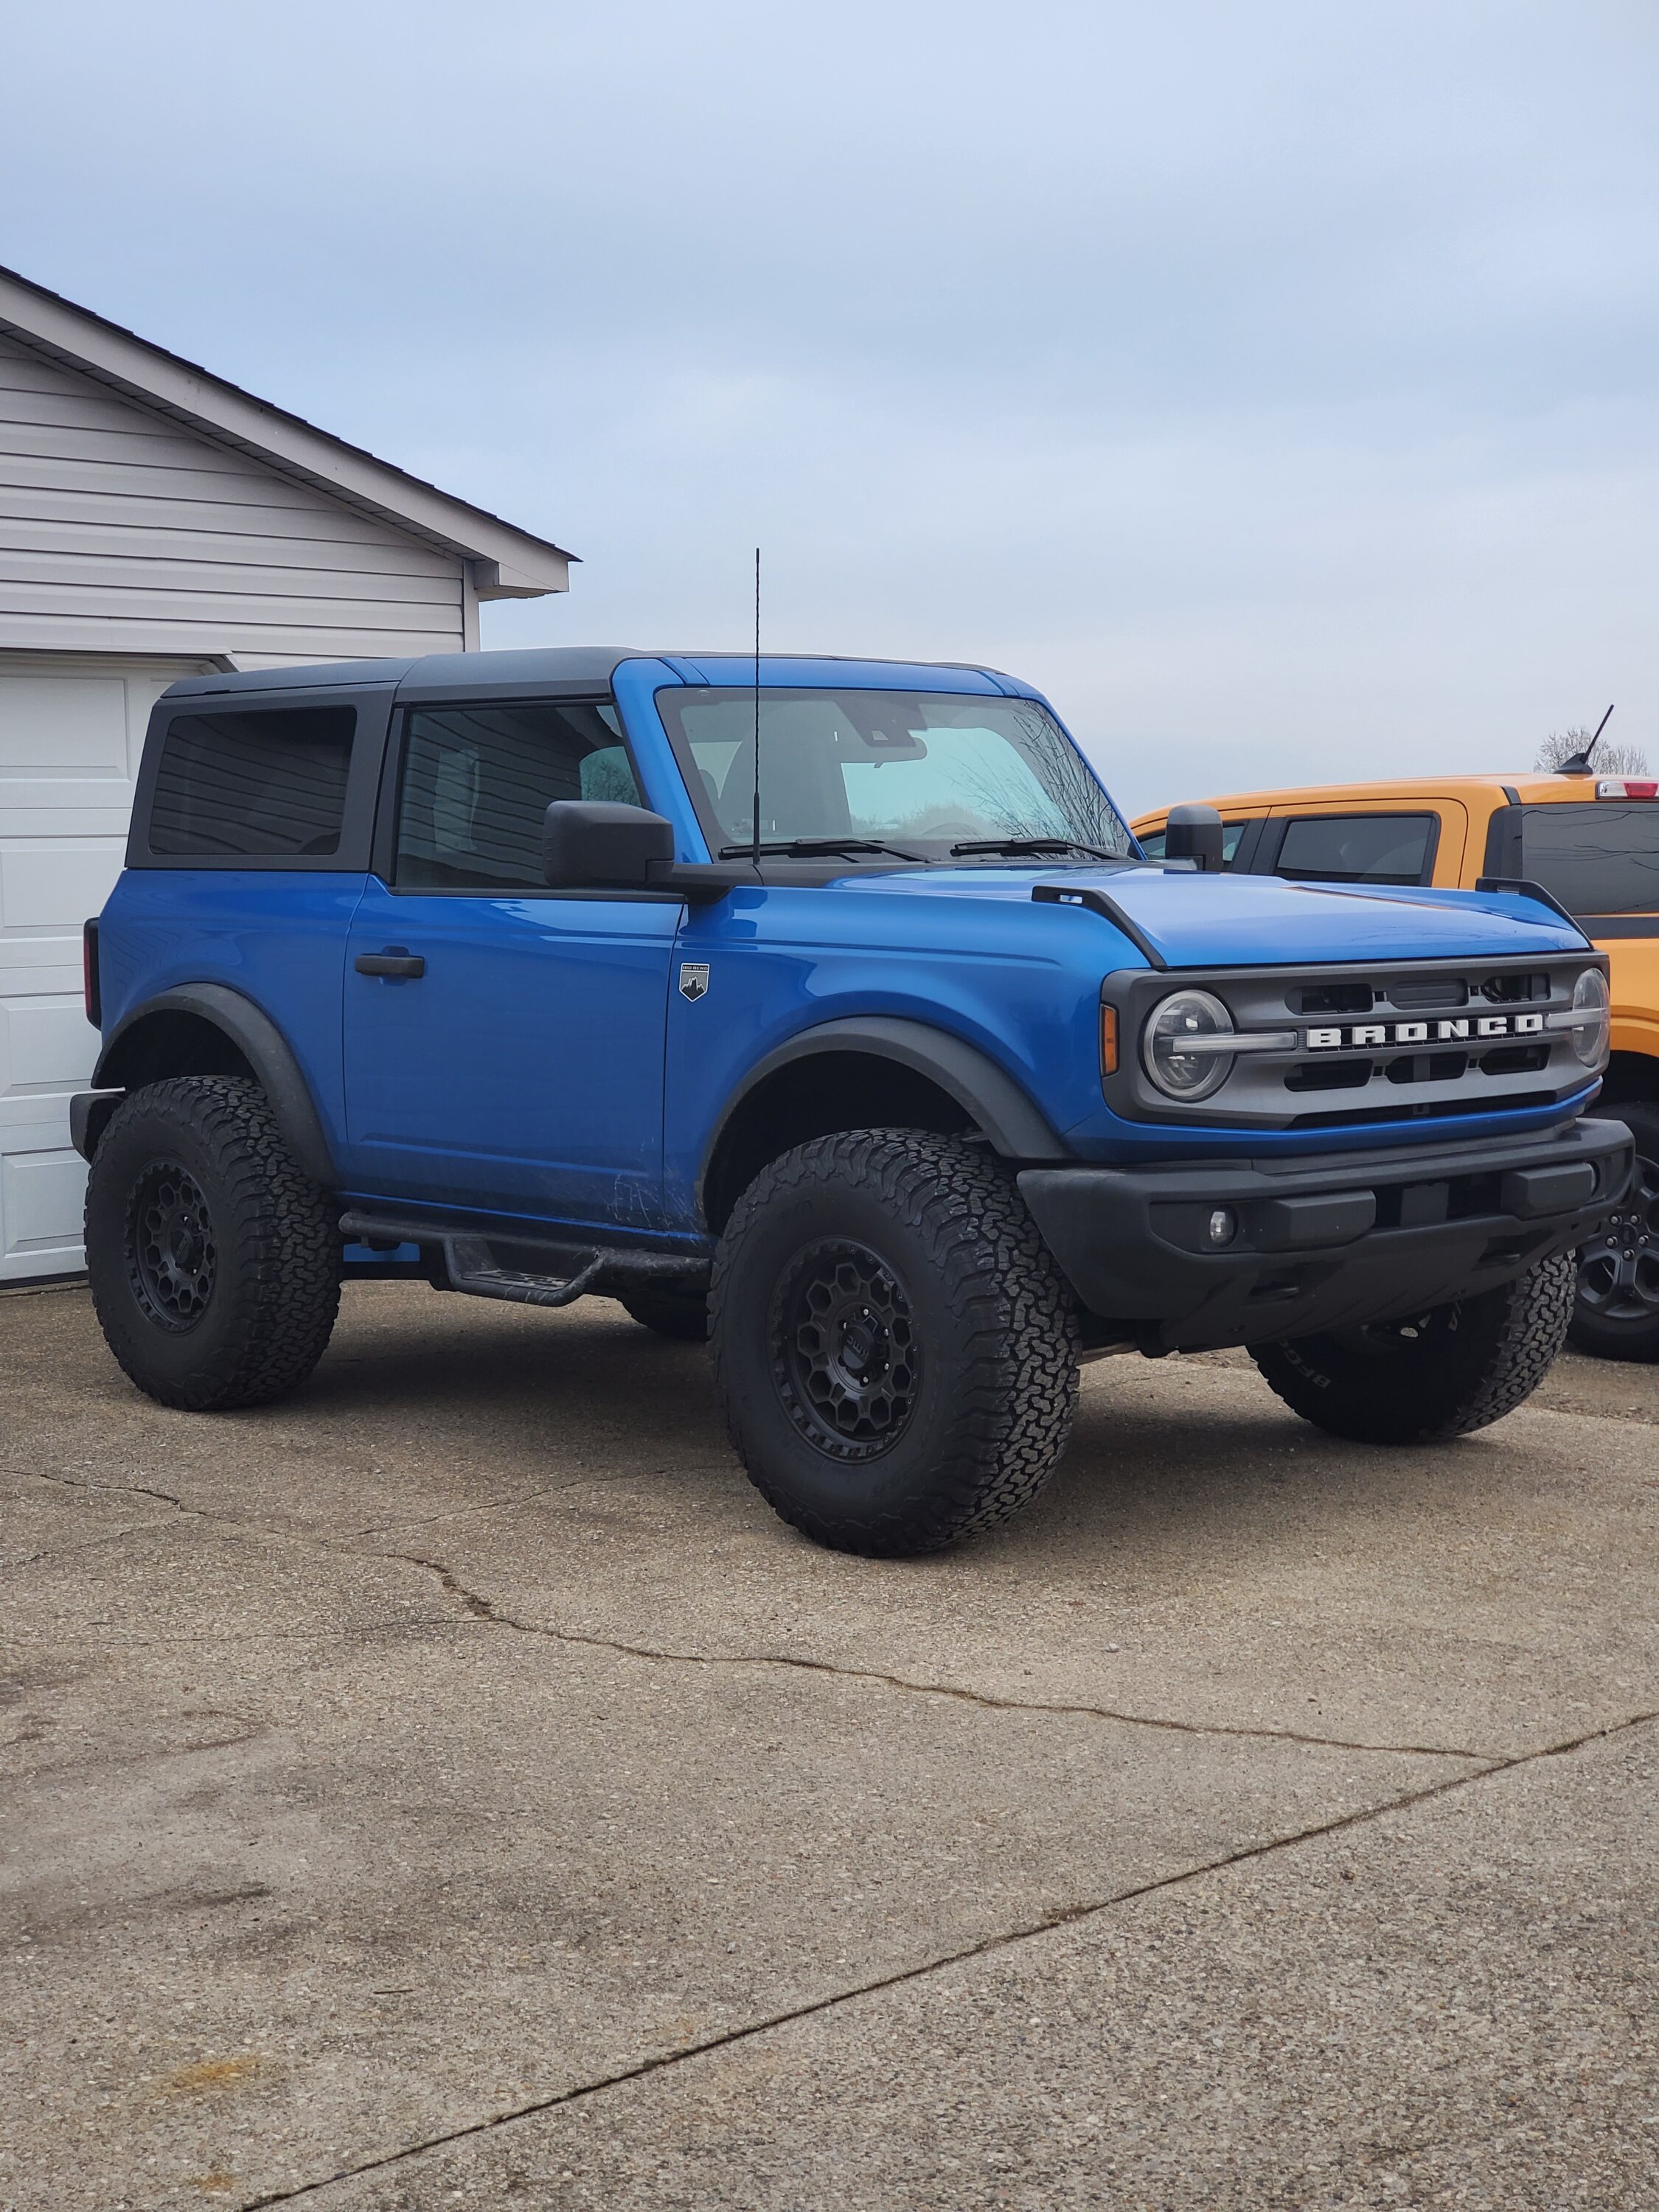 Ford Bronco Drop a Picture of Your Bronco for a Rating 20230111_164558